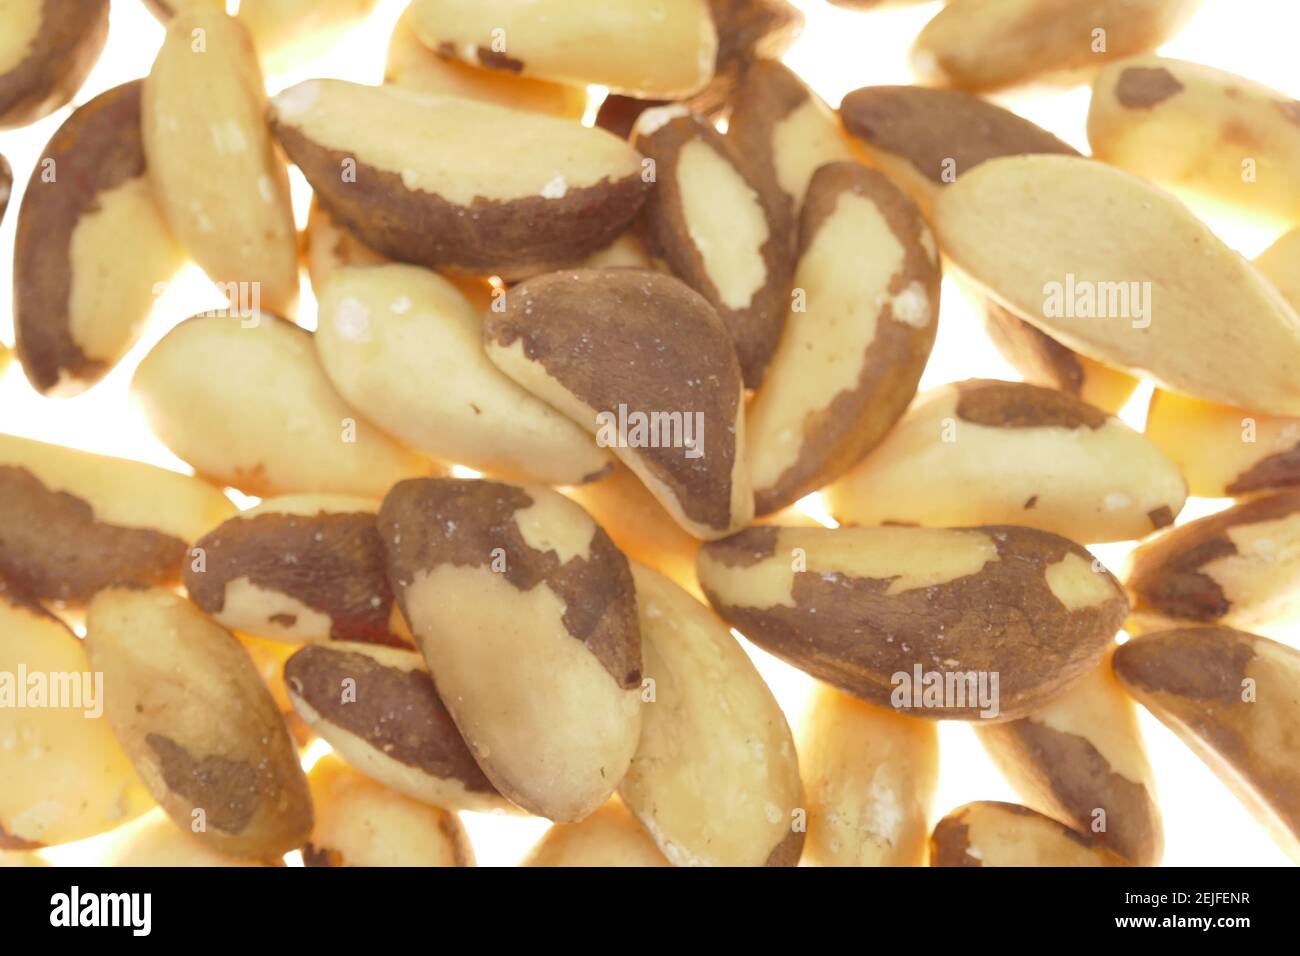 Brazil nut close-up on white background.Healthy fats. Nuts and seeds. A healthy snack. Healthy fats and proteins.  Stock Photo